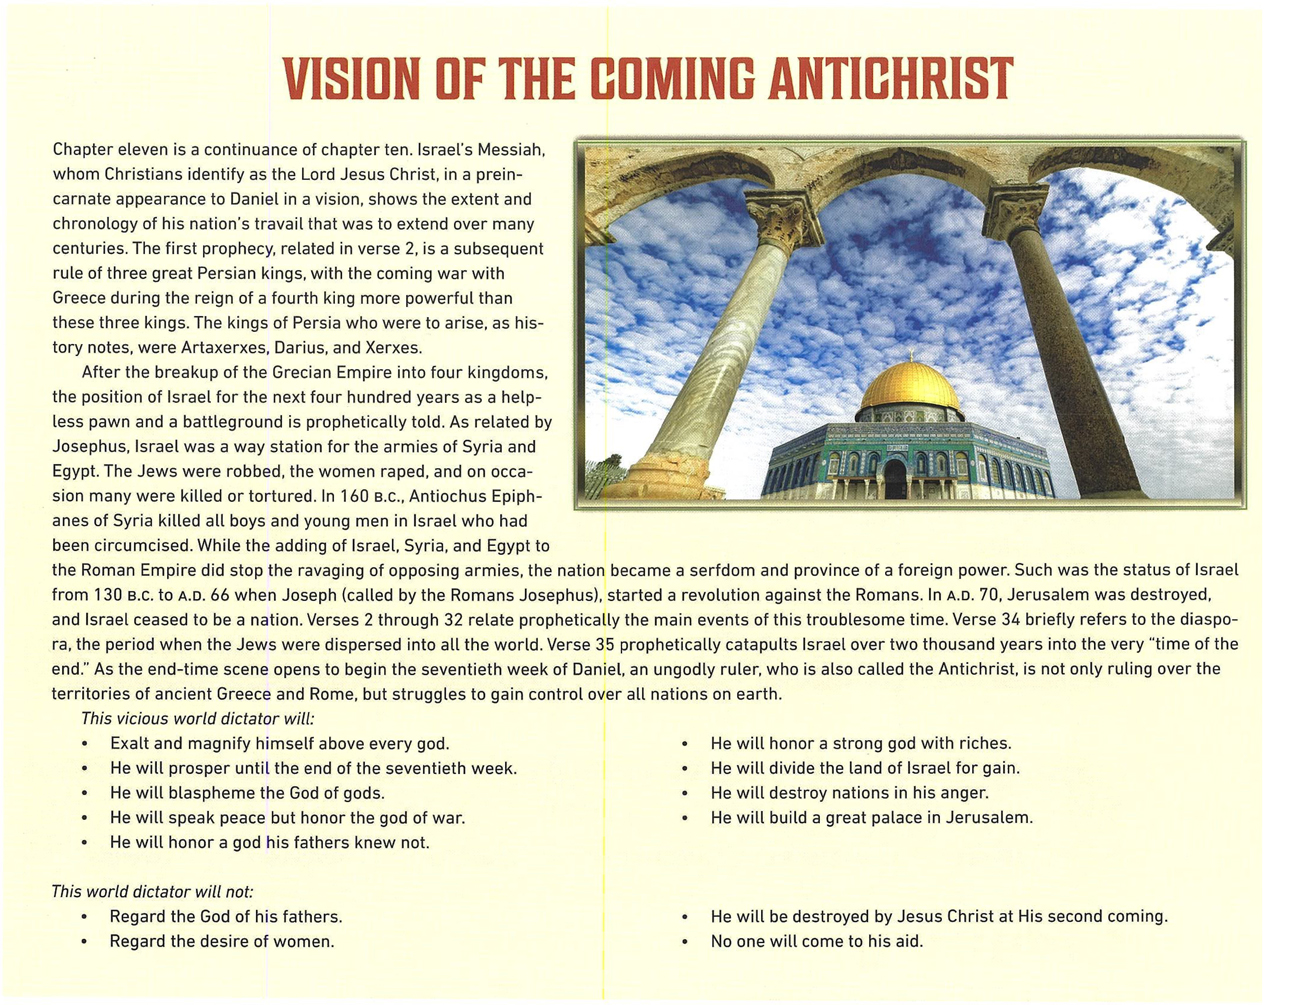 2021 Prophecy Calendar: November - Viasion of the Coming anti-Christ 